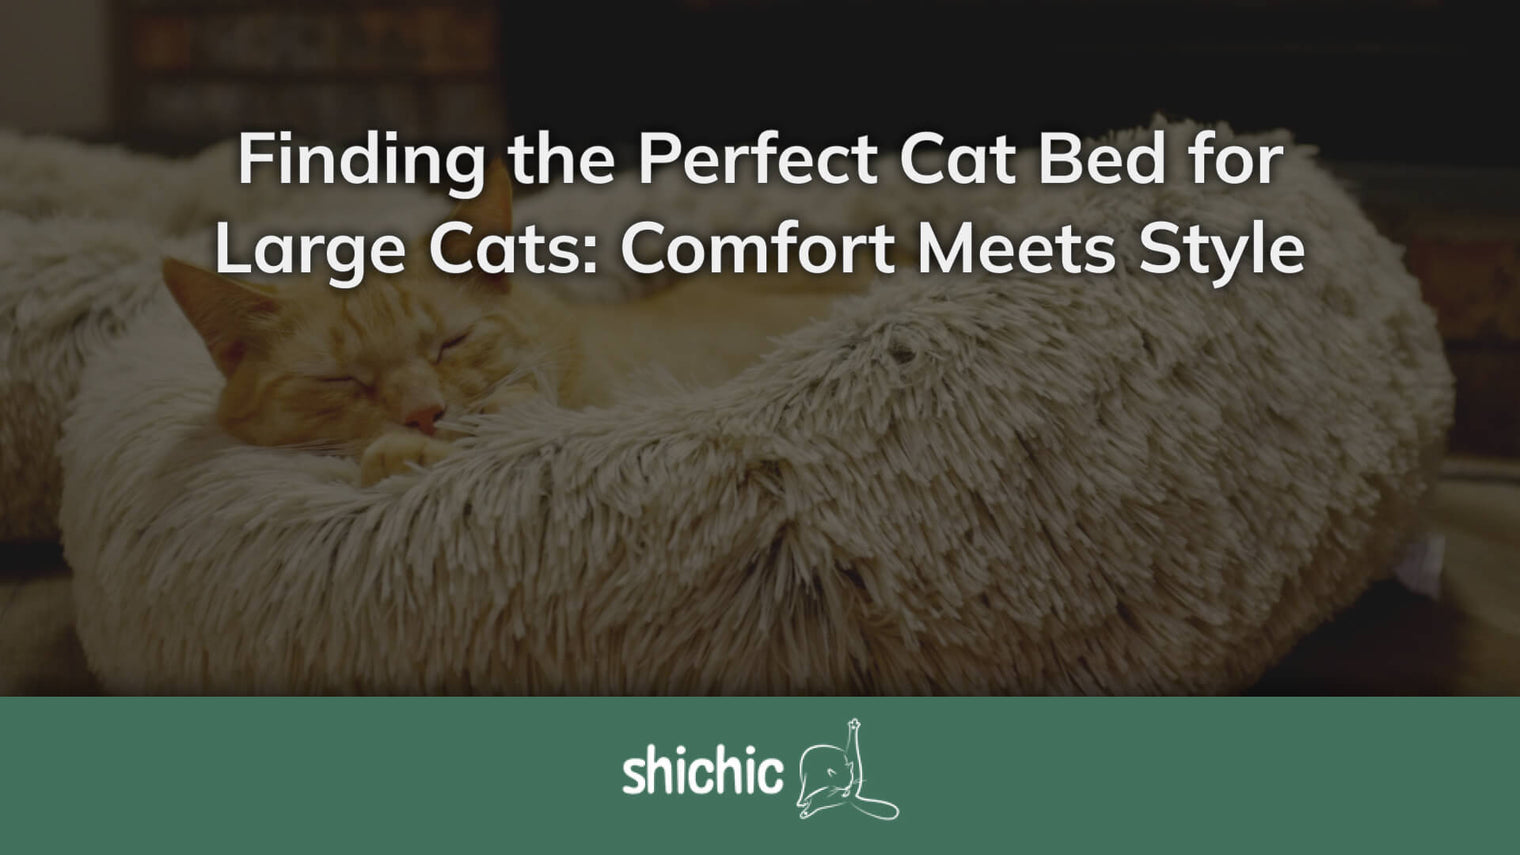 Finding the Perfect Cat Bed for Large Cats: Comfort Meets Style - Shichic